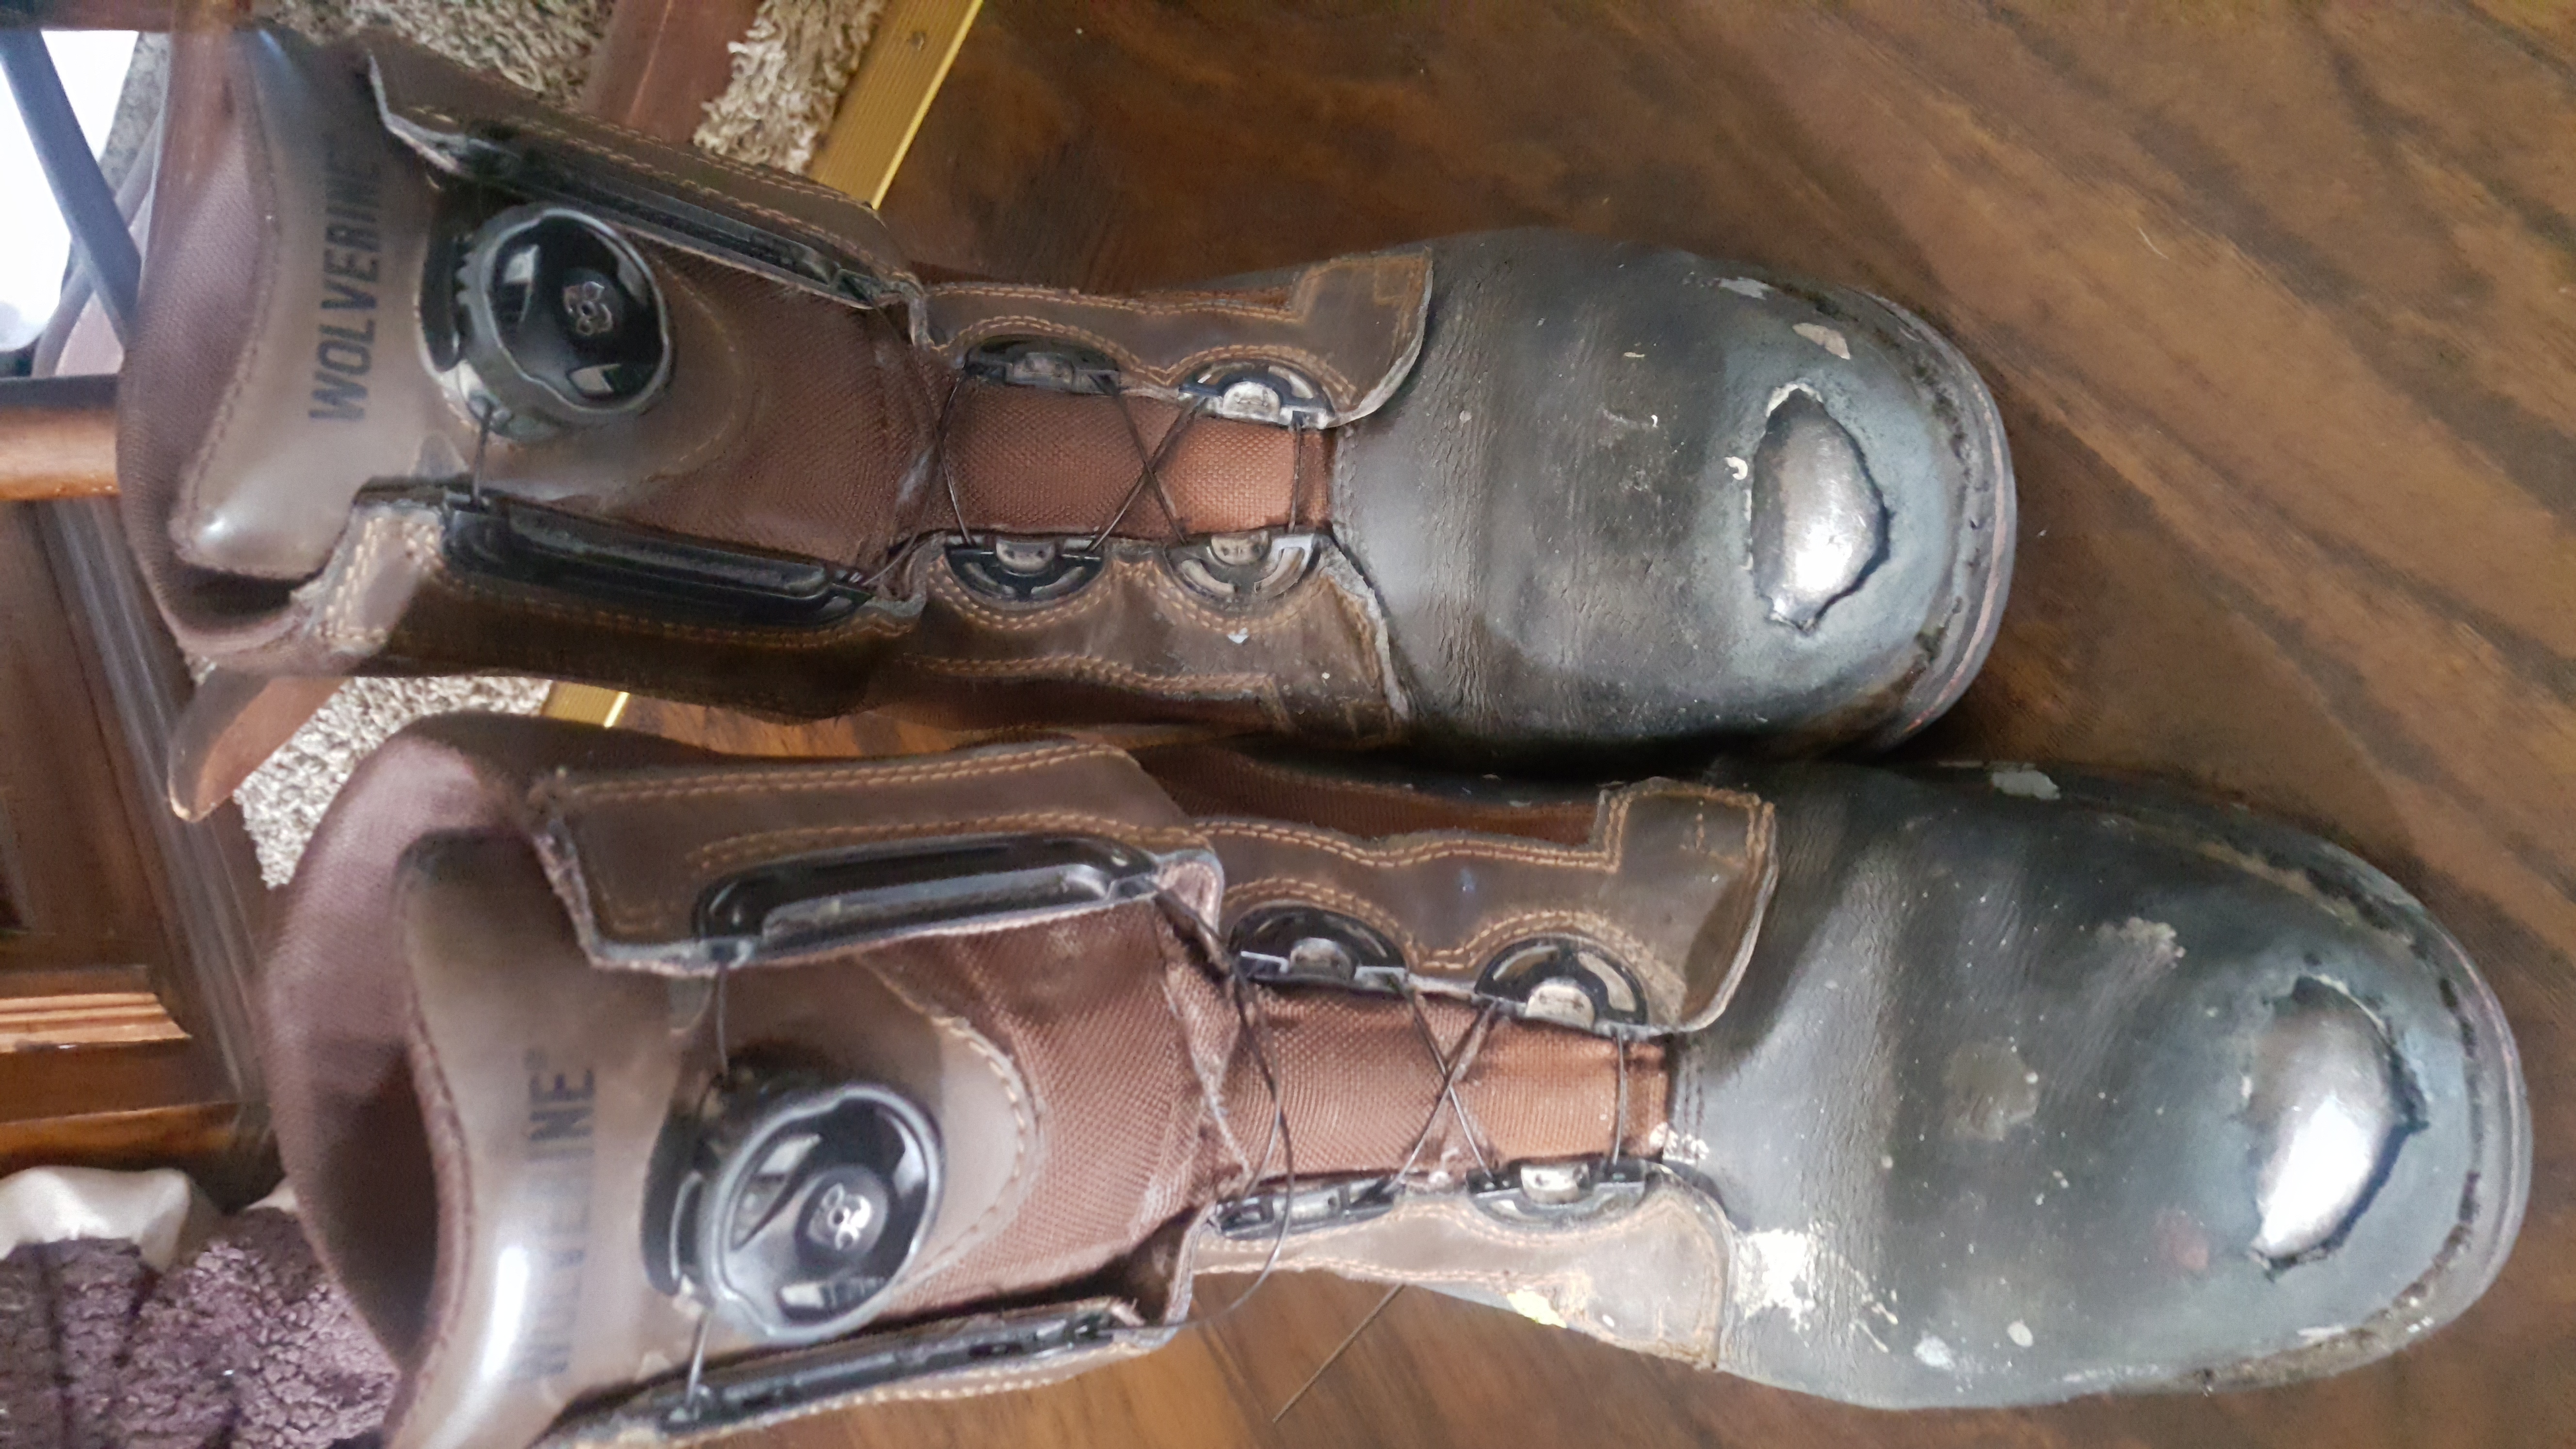 wolverine oil rigger boots